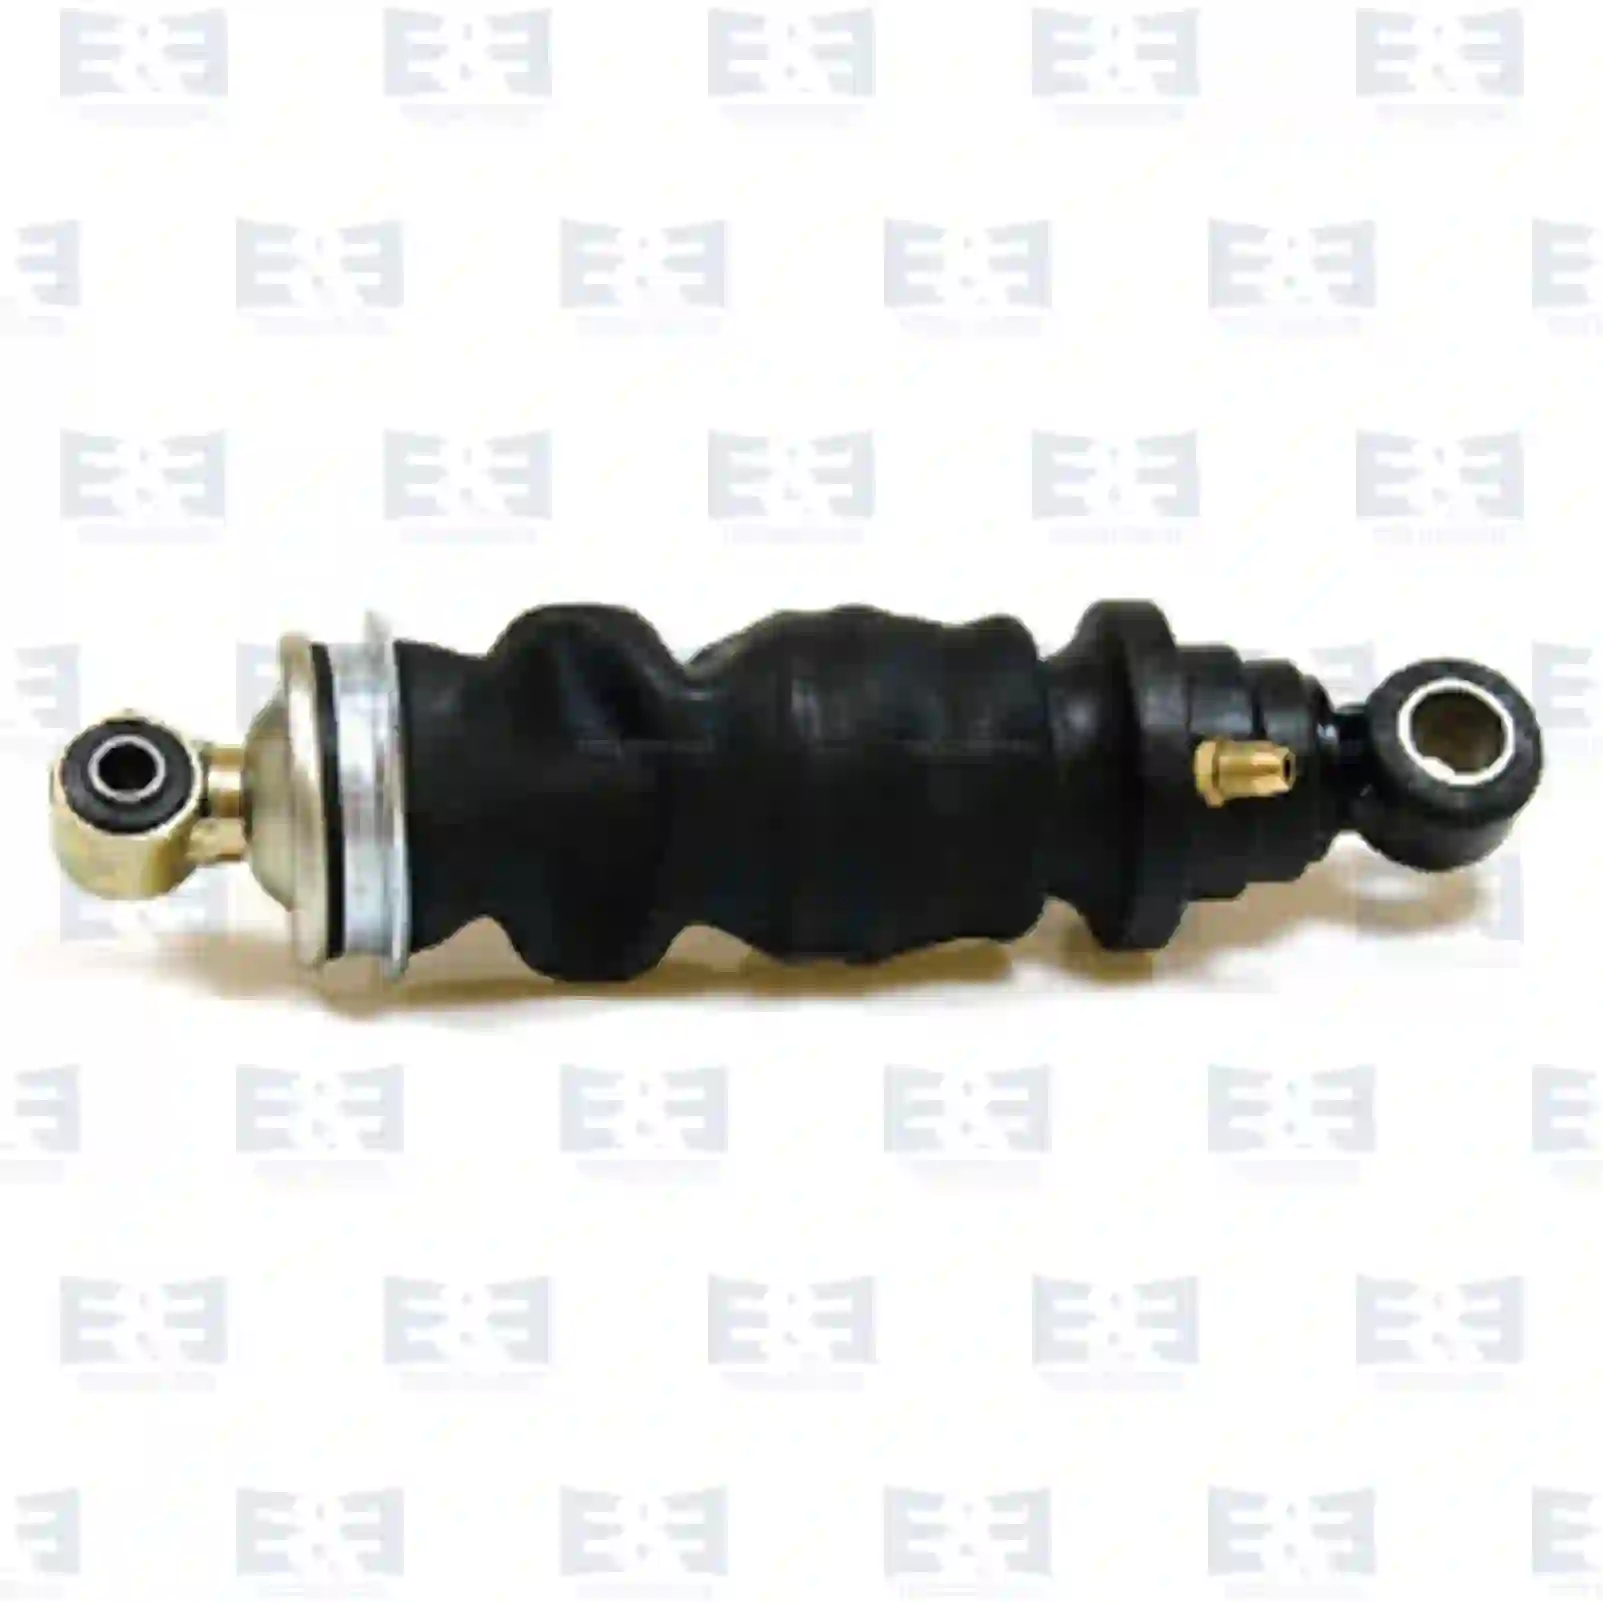 Cabin shock absorber, with air bellow, 2E2276240, 9428900119, 9428902919, 9428906919, ||  2E2276240 E&E Truck Spare Parts | Truck Spare Parts, Auotomotive Spare Parts Cabin shock absorber, with air bellow, 2E2276240, 9428900119, 9428902919, 9428906919, ||  2E2276240 E&E Truck Spare Parts | Truck Spare Parts, Auotomotive Spare Parts